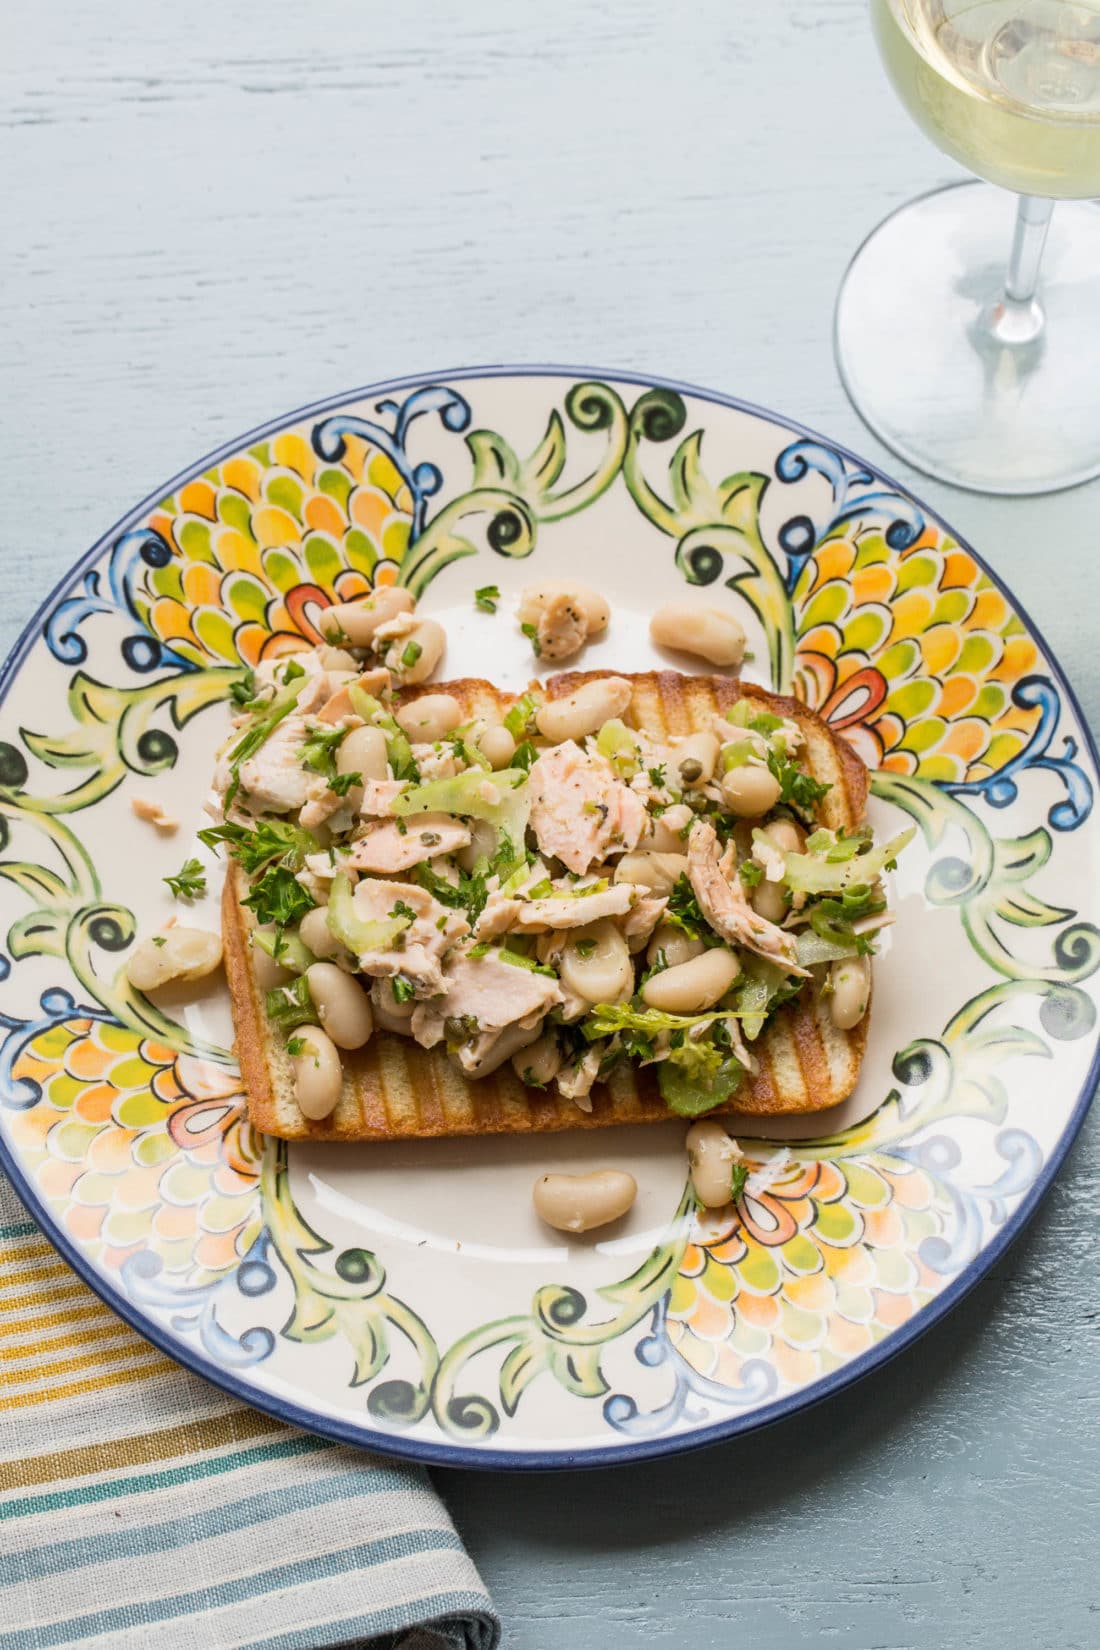 Colorful plate with a Salmon and White Bean Bruschetta.